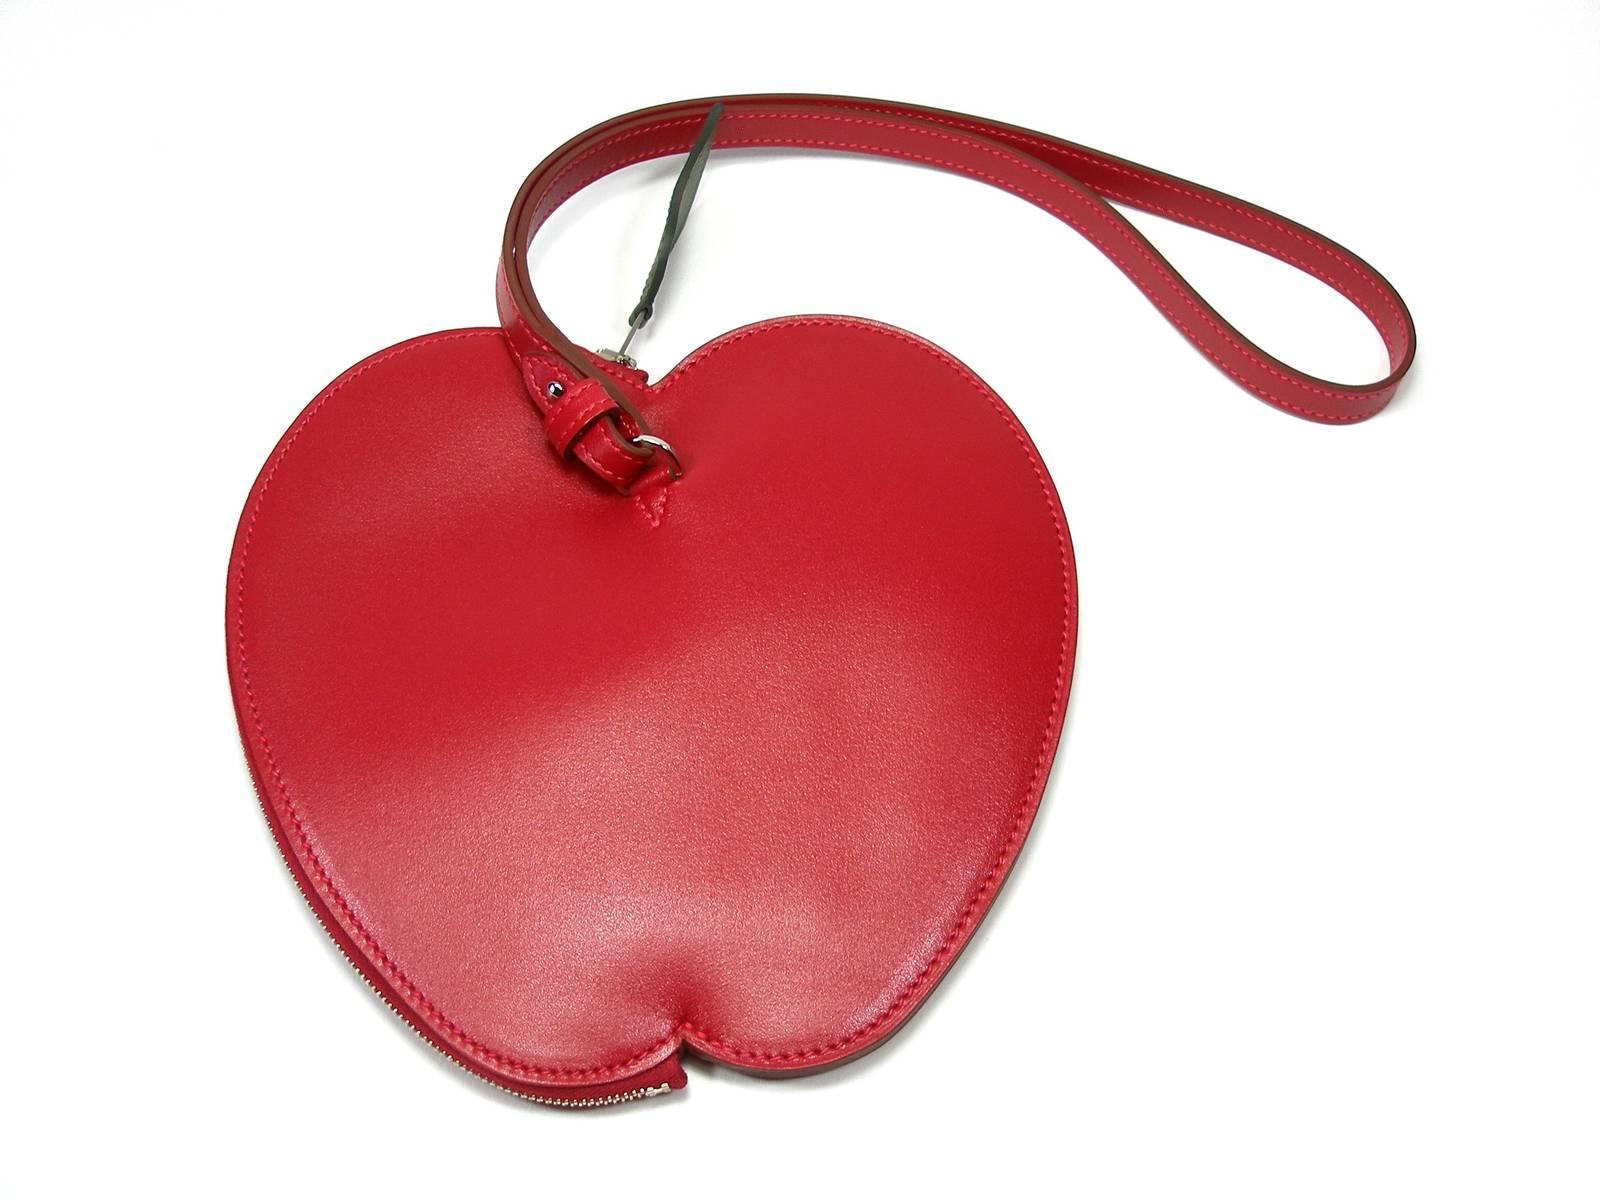 Sold out in Hermès shop 
Tutti Frutti Apple Clutch
Like new
Red Color 
This item may have been worn but has no visible signs of wear.
Measurements:
6.5